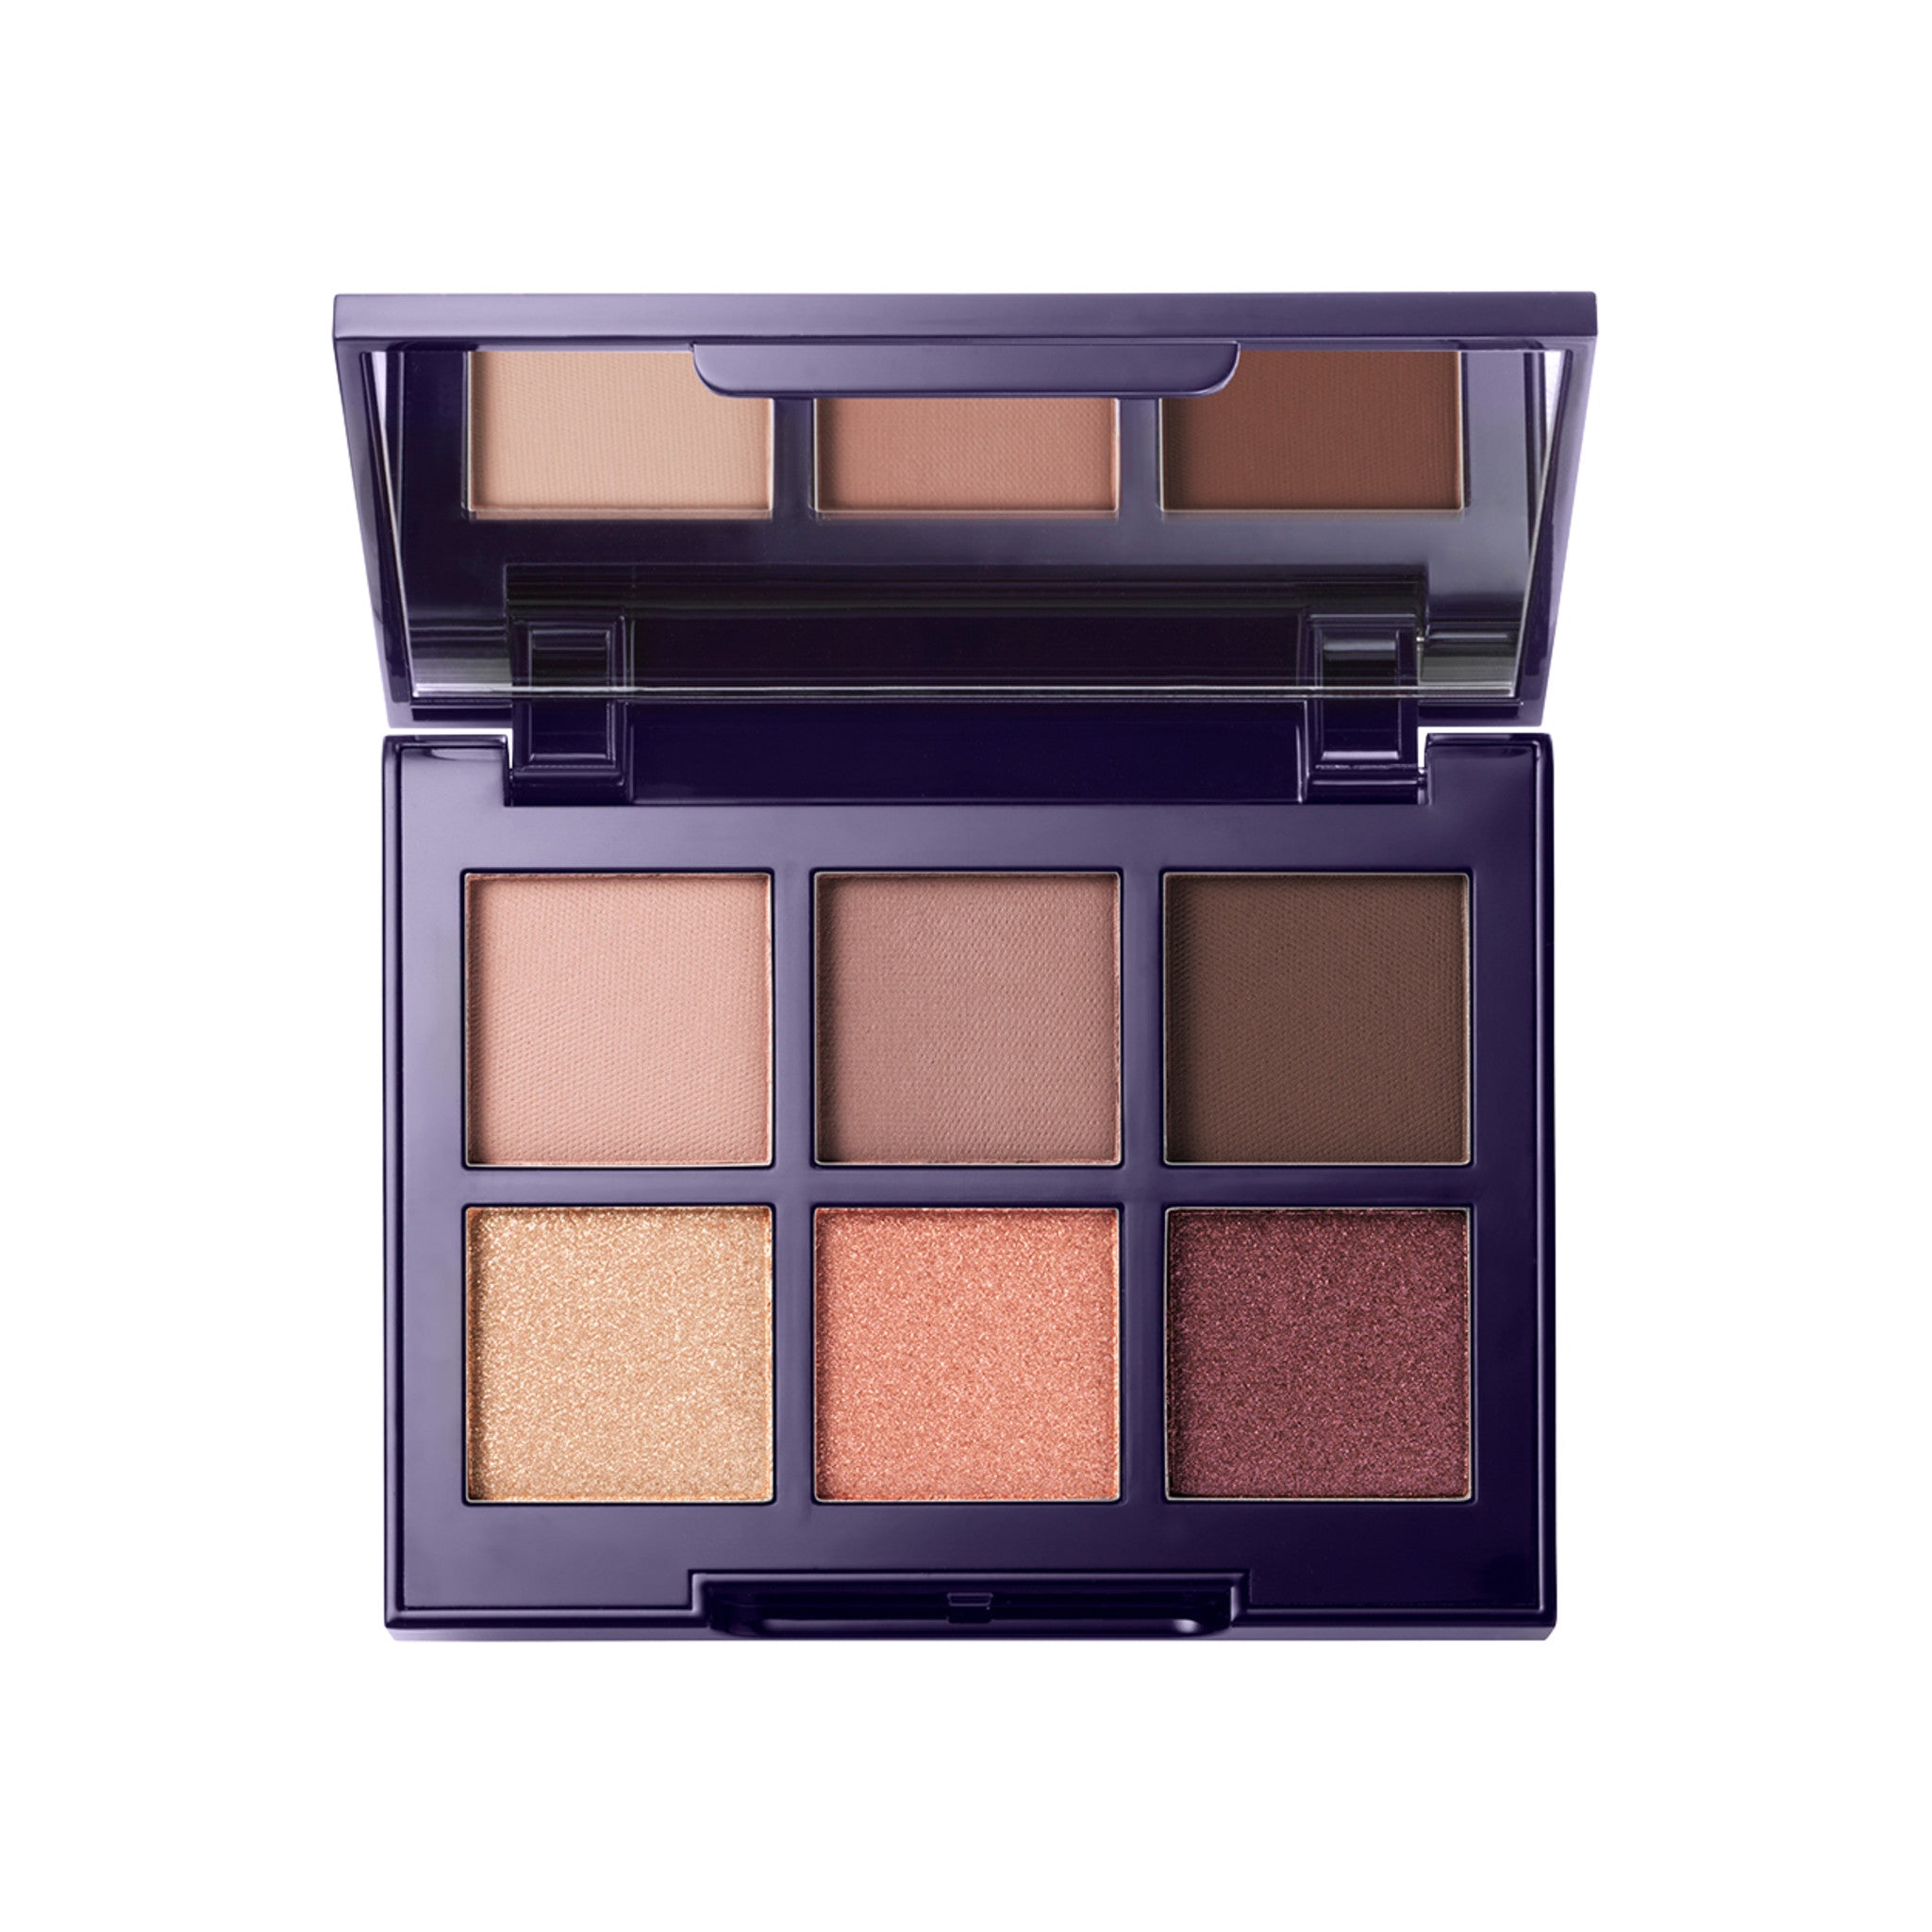 Kevyn Aucoin The Contour Eyeshadow Palette Color/Shade variant: Medium Deep. This product is in the color multi